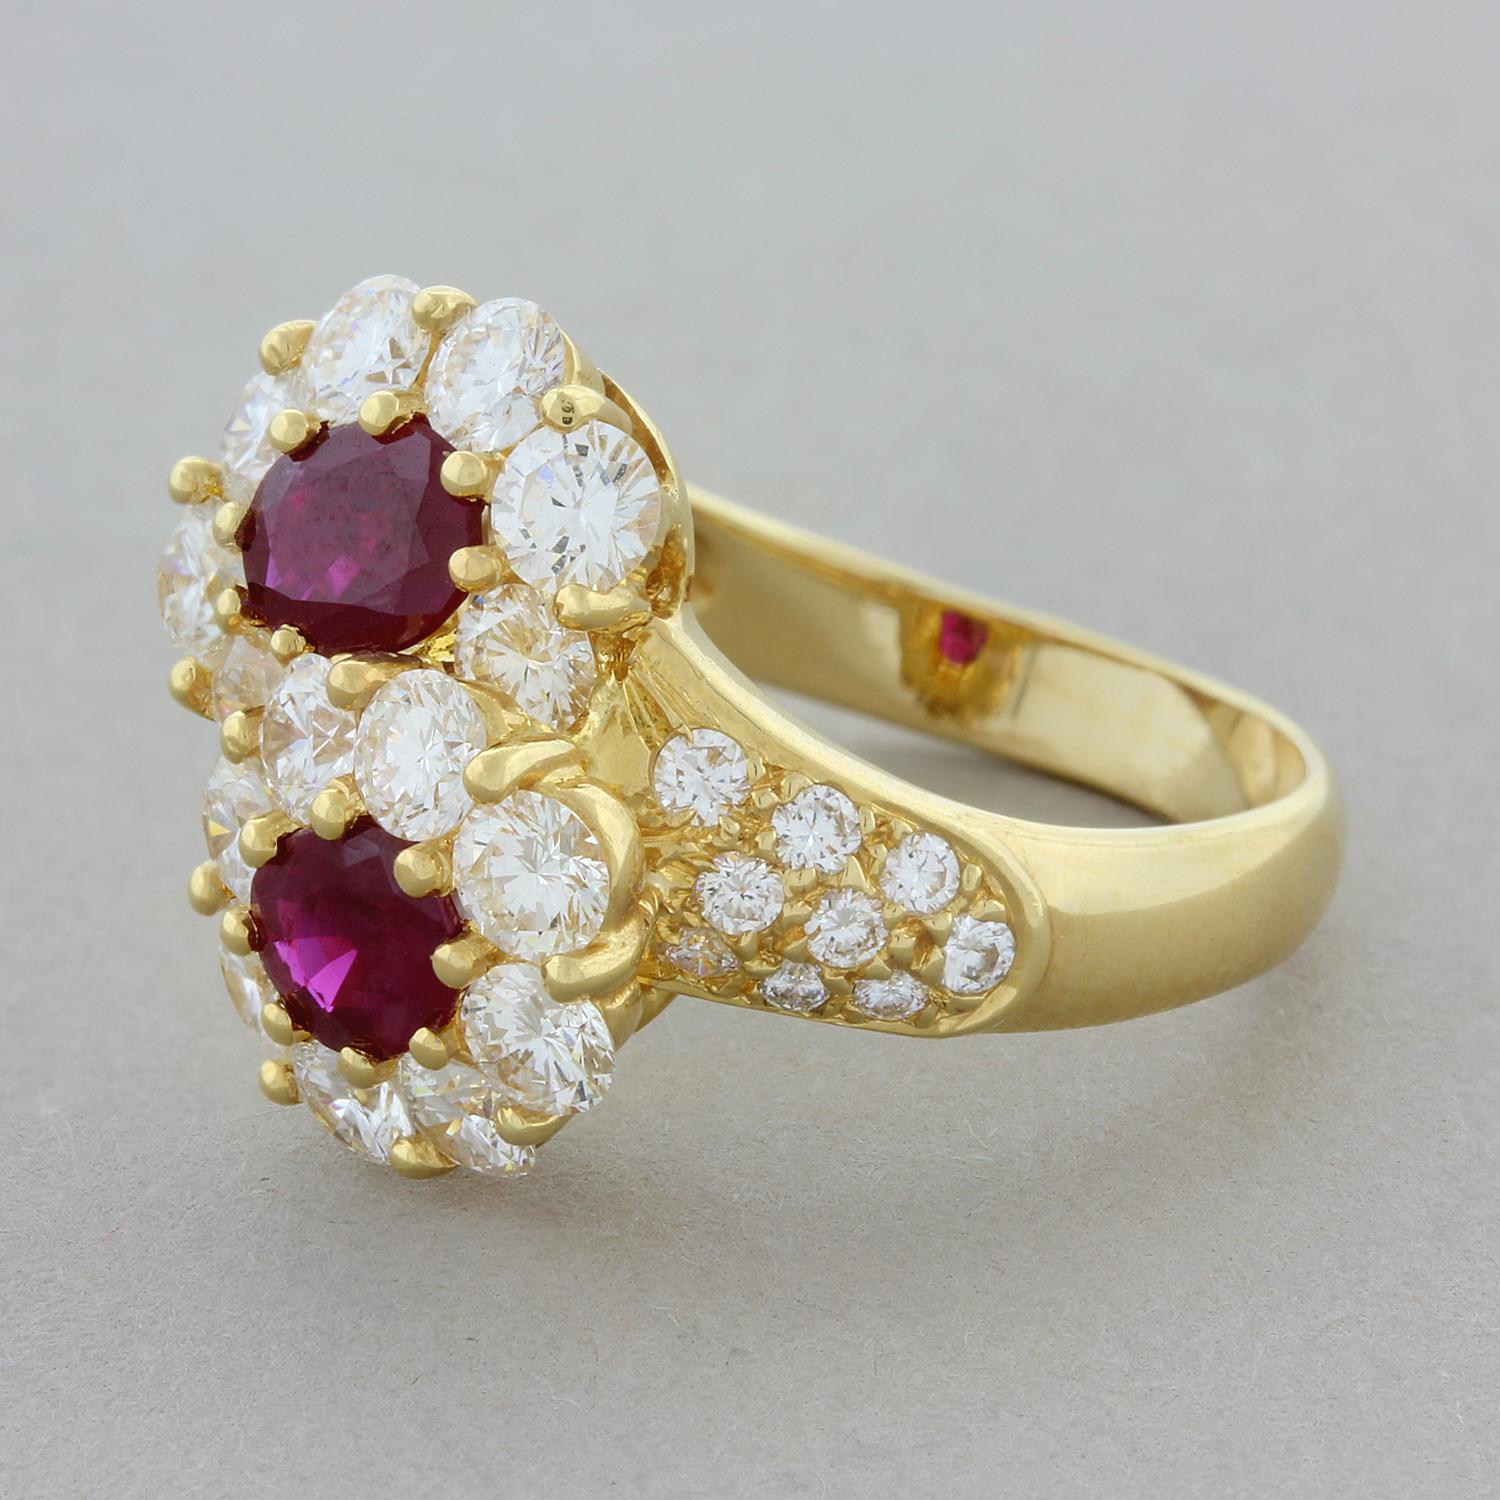 This elegant ring features two side-by-side flower clusters. The 1.24 carats of oval cut rubies are haloed by 2.01 carats of VS quality round cut set in 18K yellow gold. A simple yet quality piece with lovely bright gems and diamonds.

Ring Size 6.5